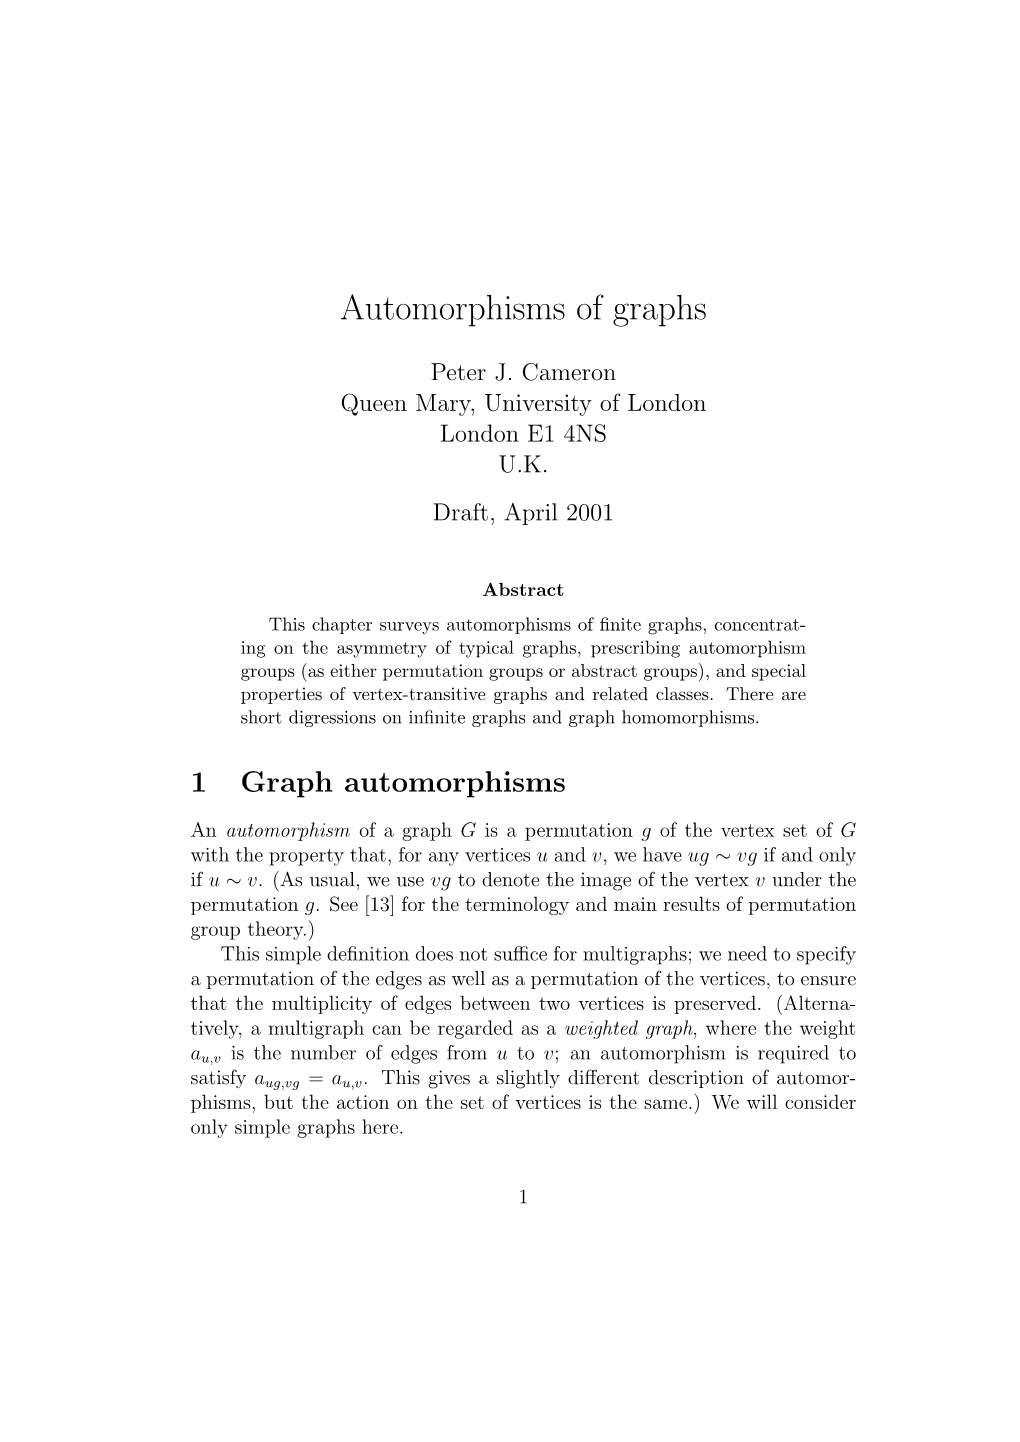 Automorphisms of Graphs